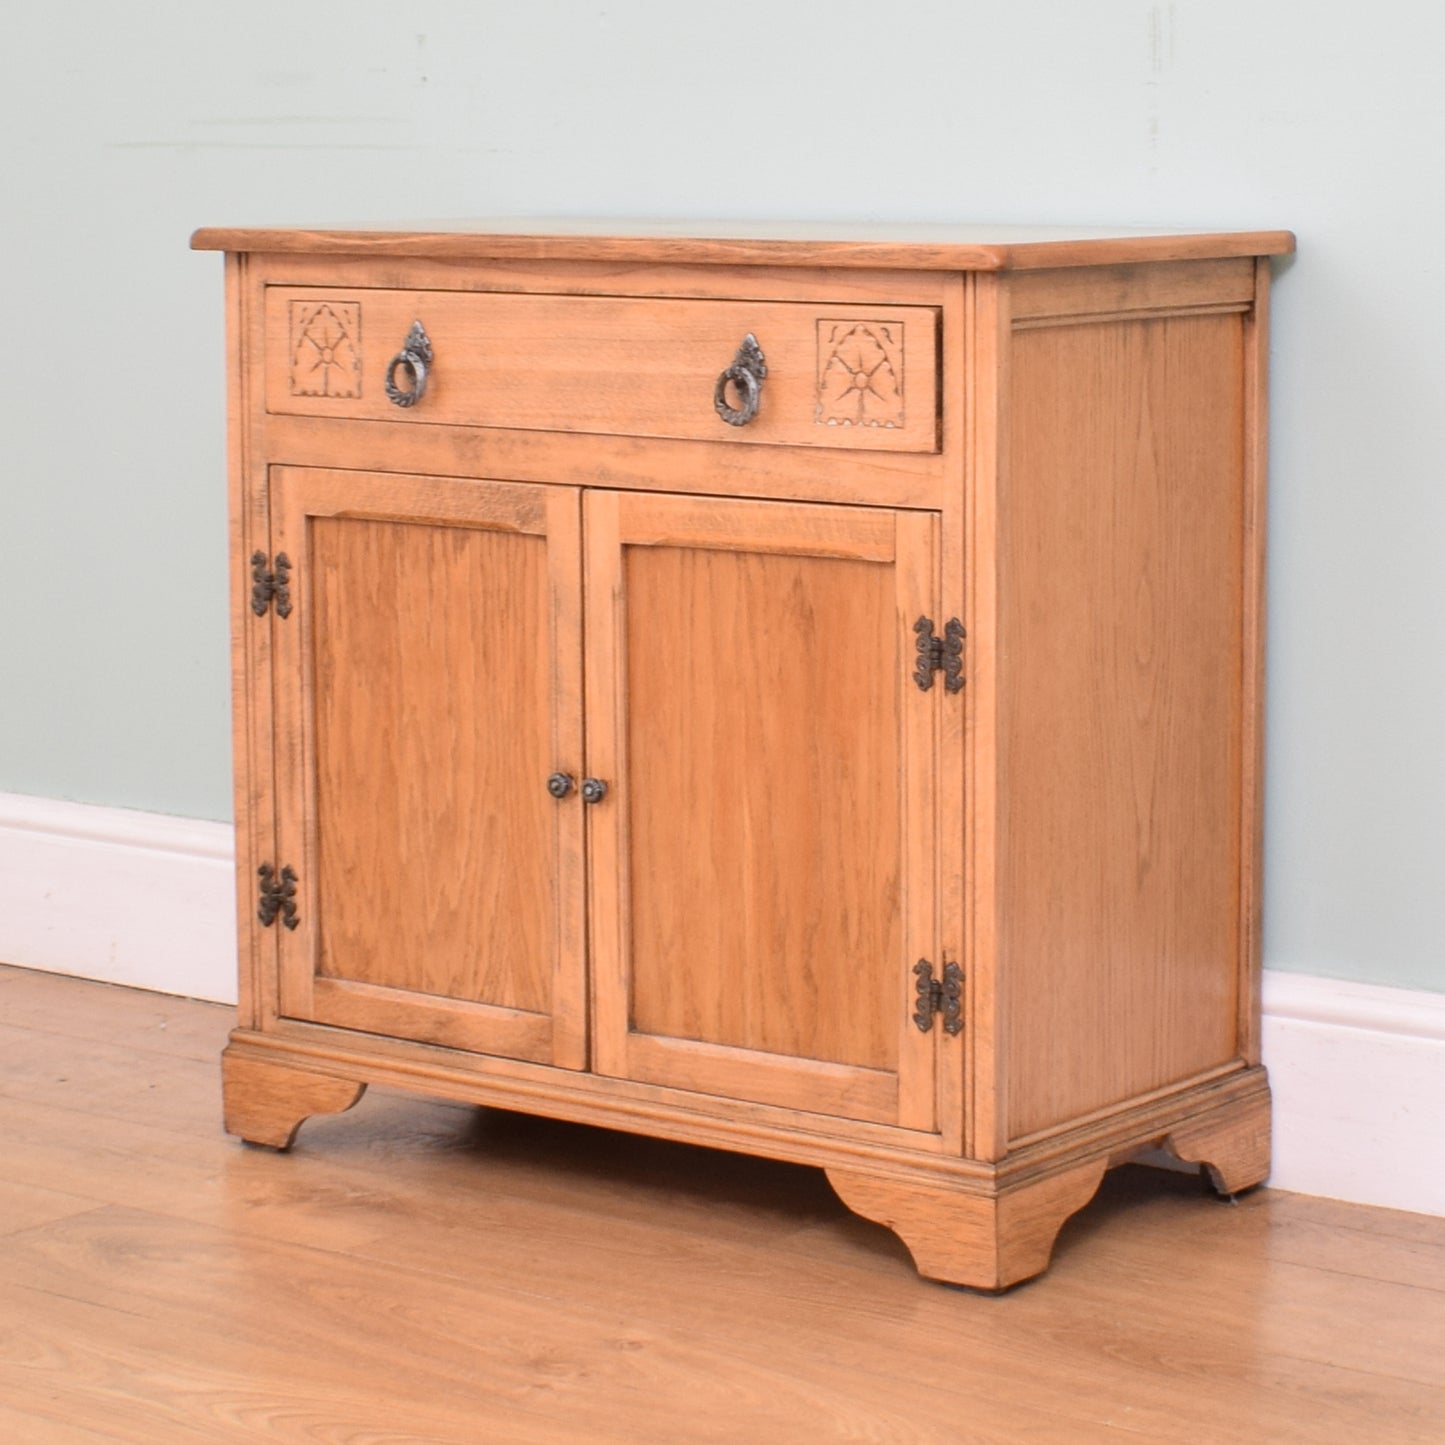 Small Restored Sideboard